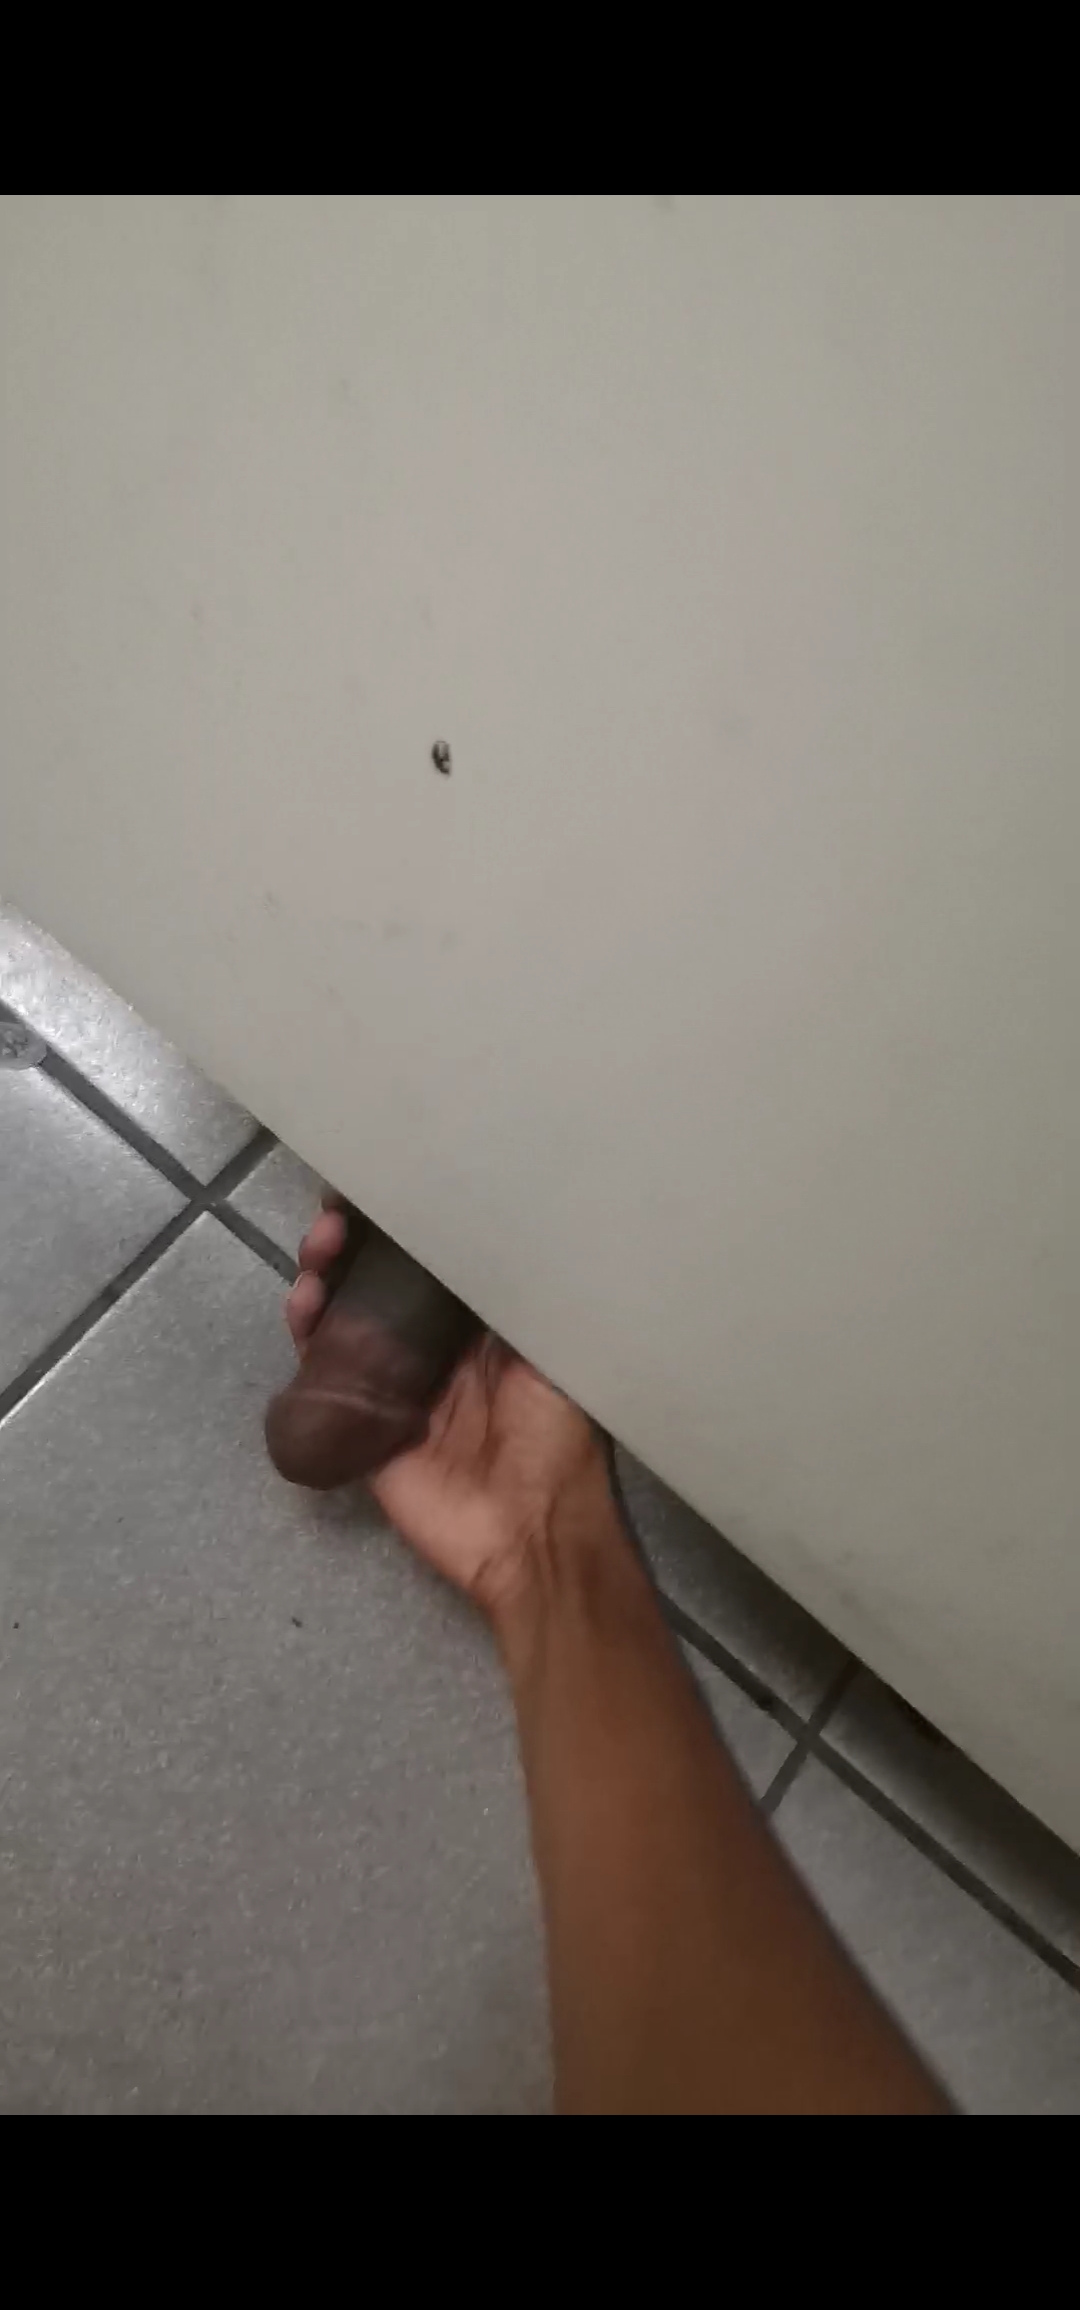 Jerked off under stall - video 2